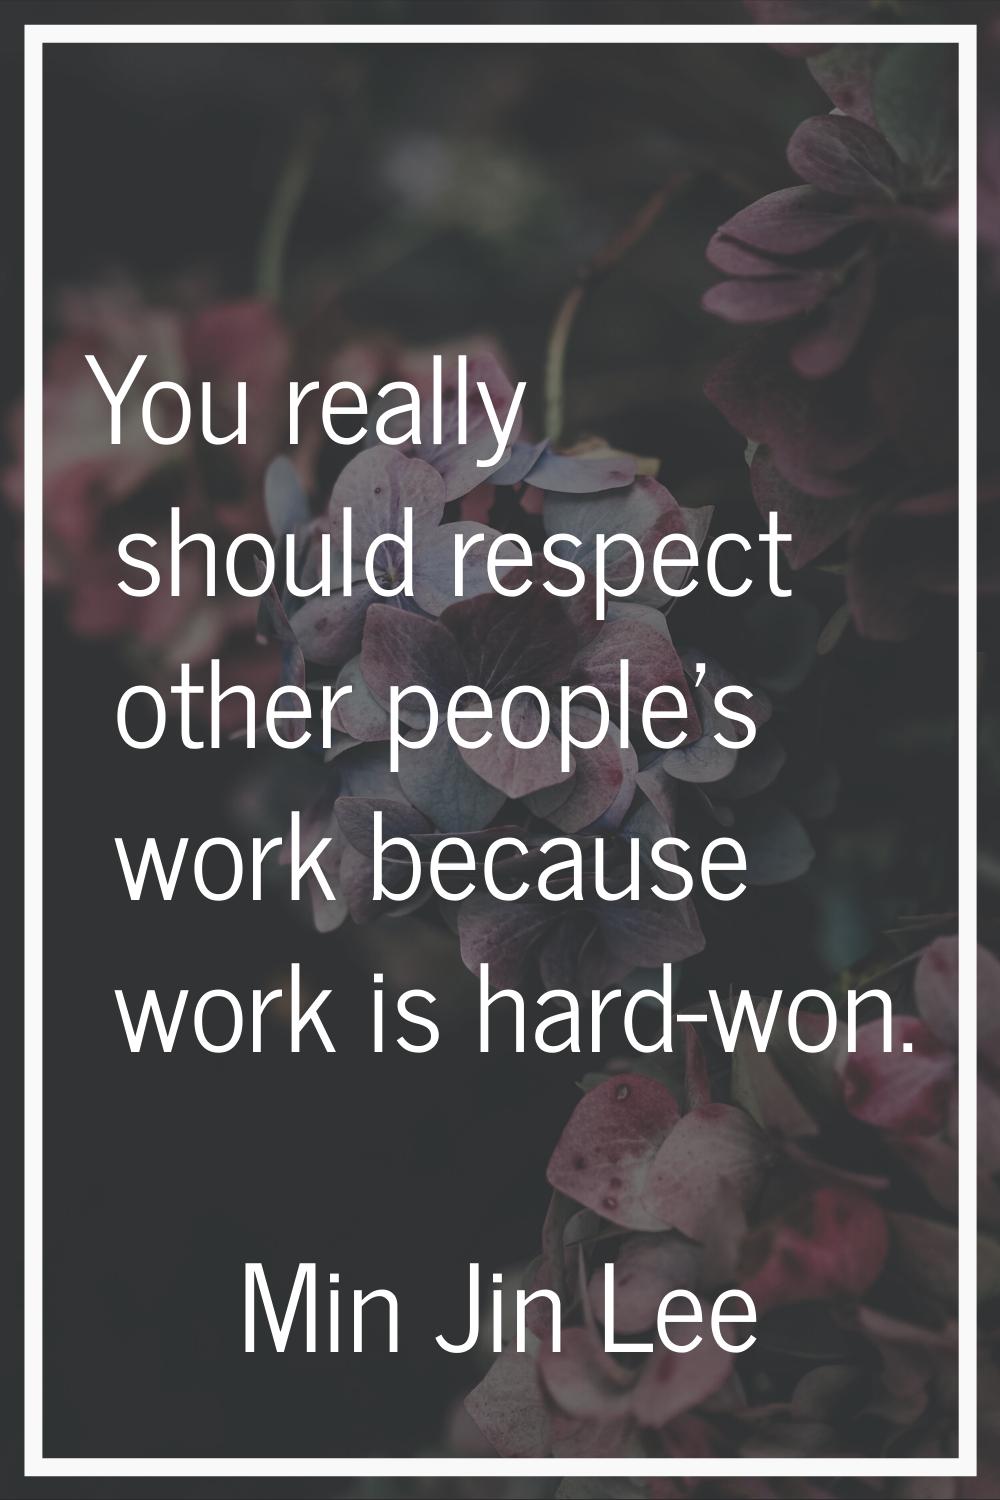 You really should respect other people's work because work is hard-won.